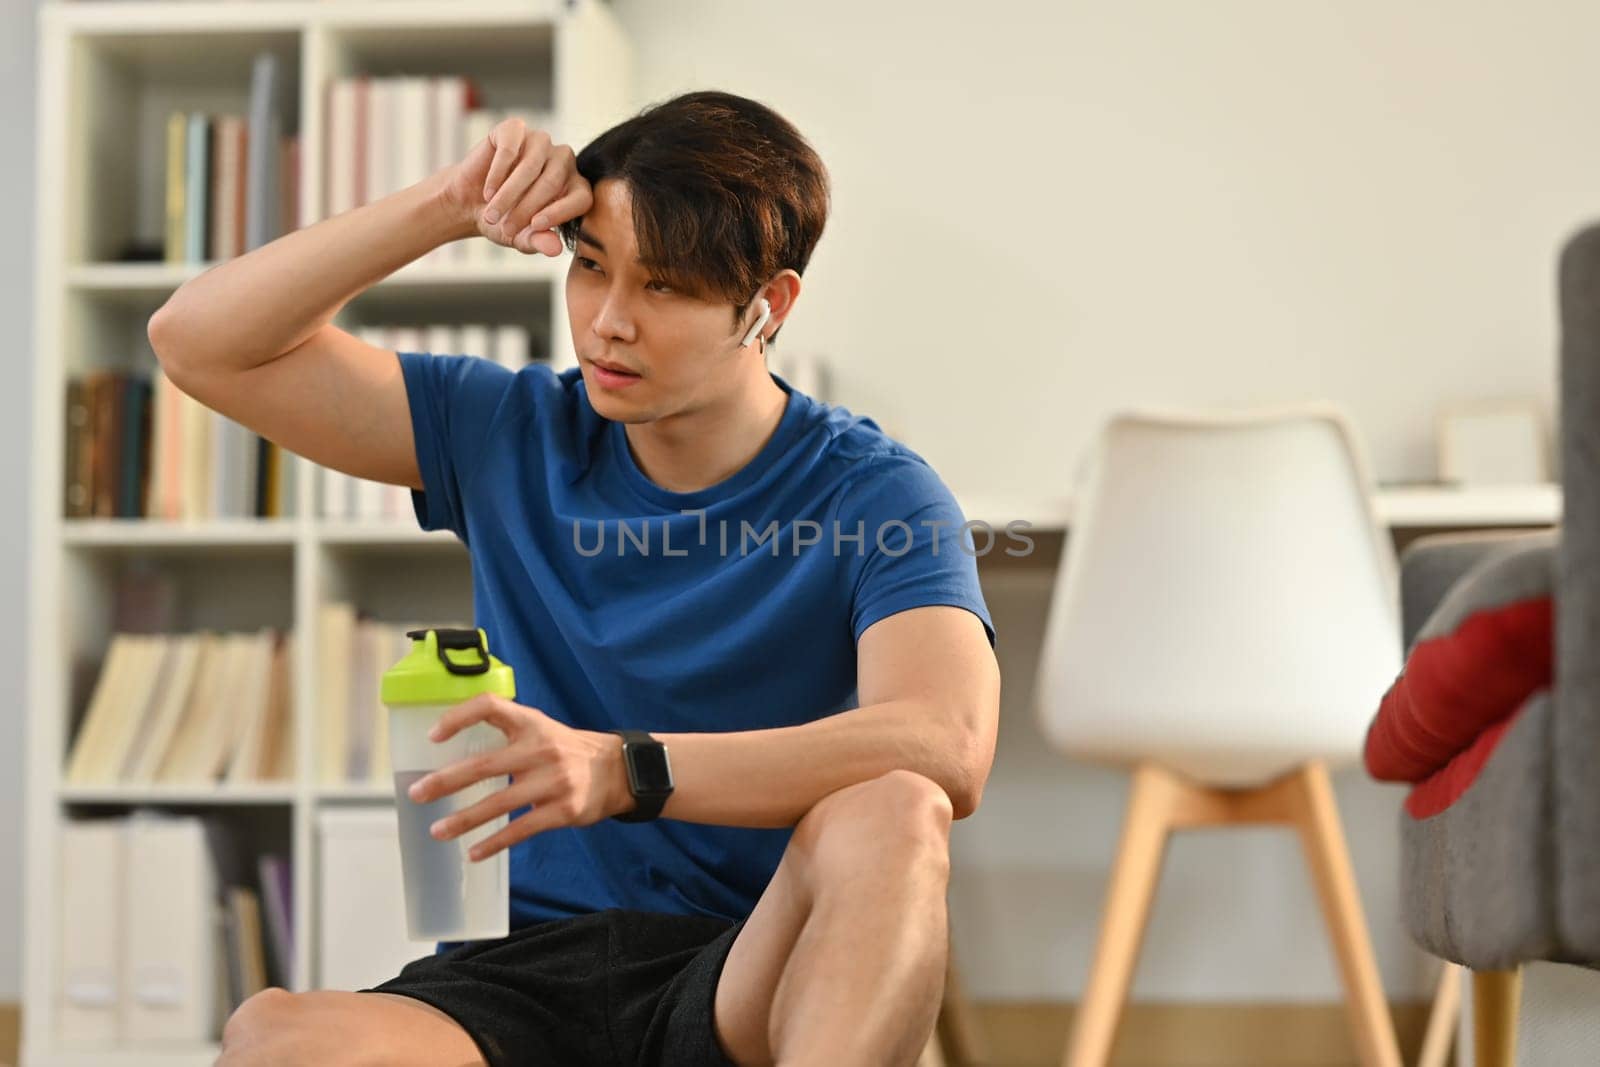 Male athlete holding a bottle of water, resting after his home workout and cardio exercises. Healthy lifestyle and fitness concept.